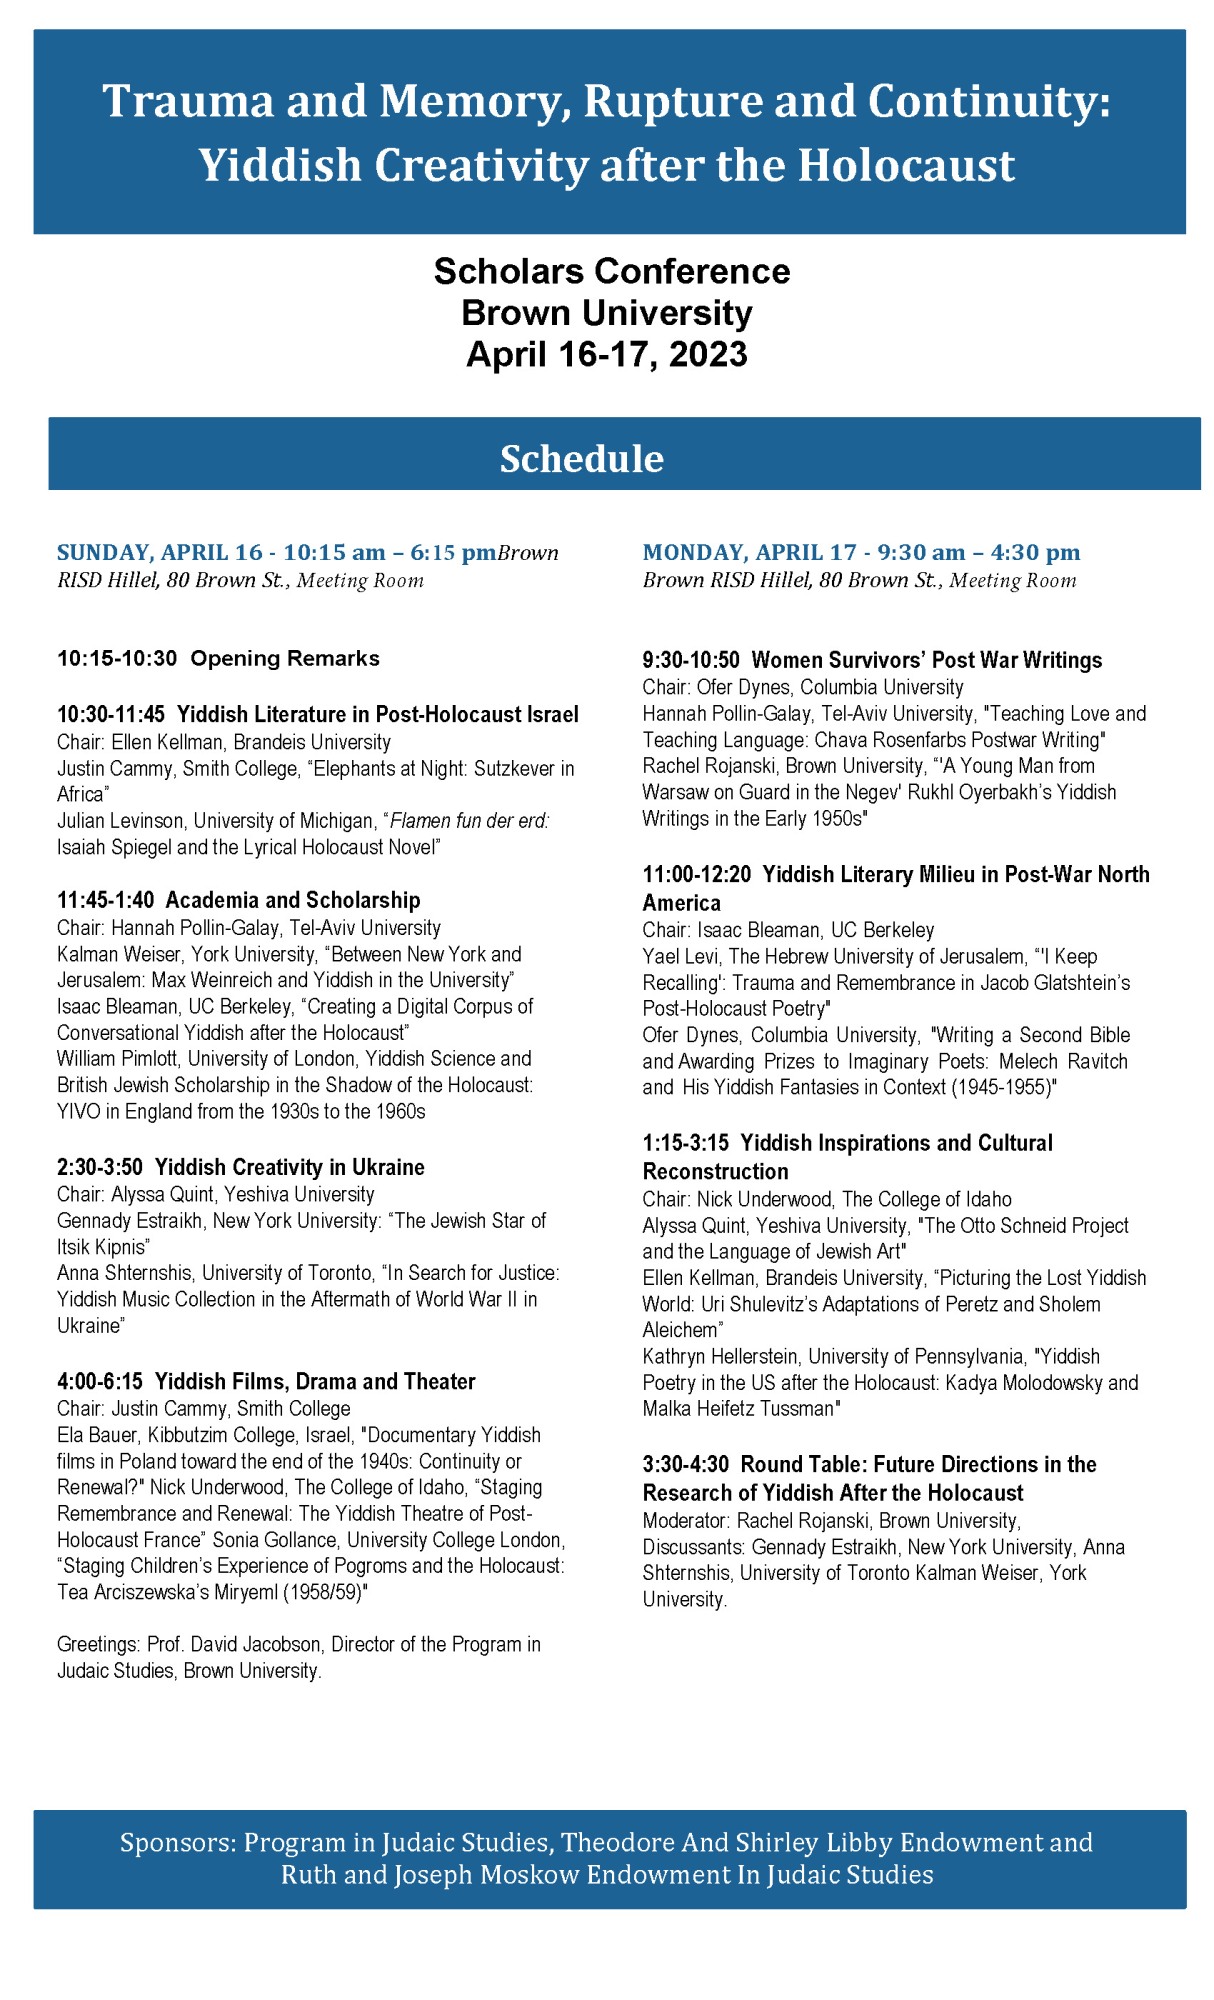 Yiddish conference schedule for April 16th and 17th 